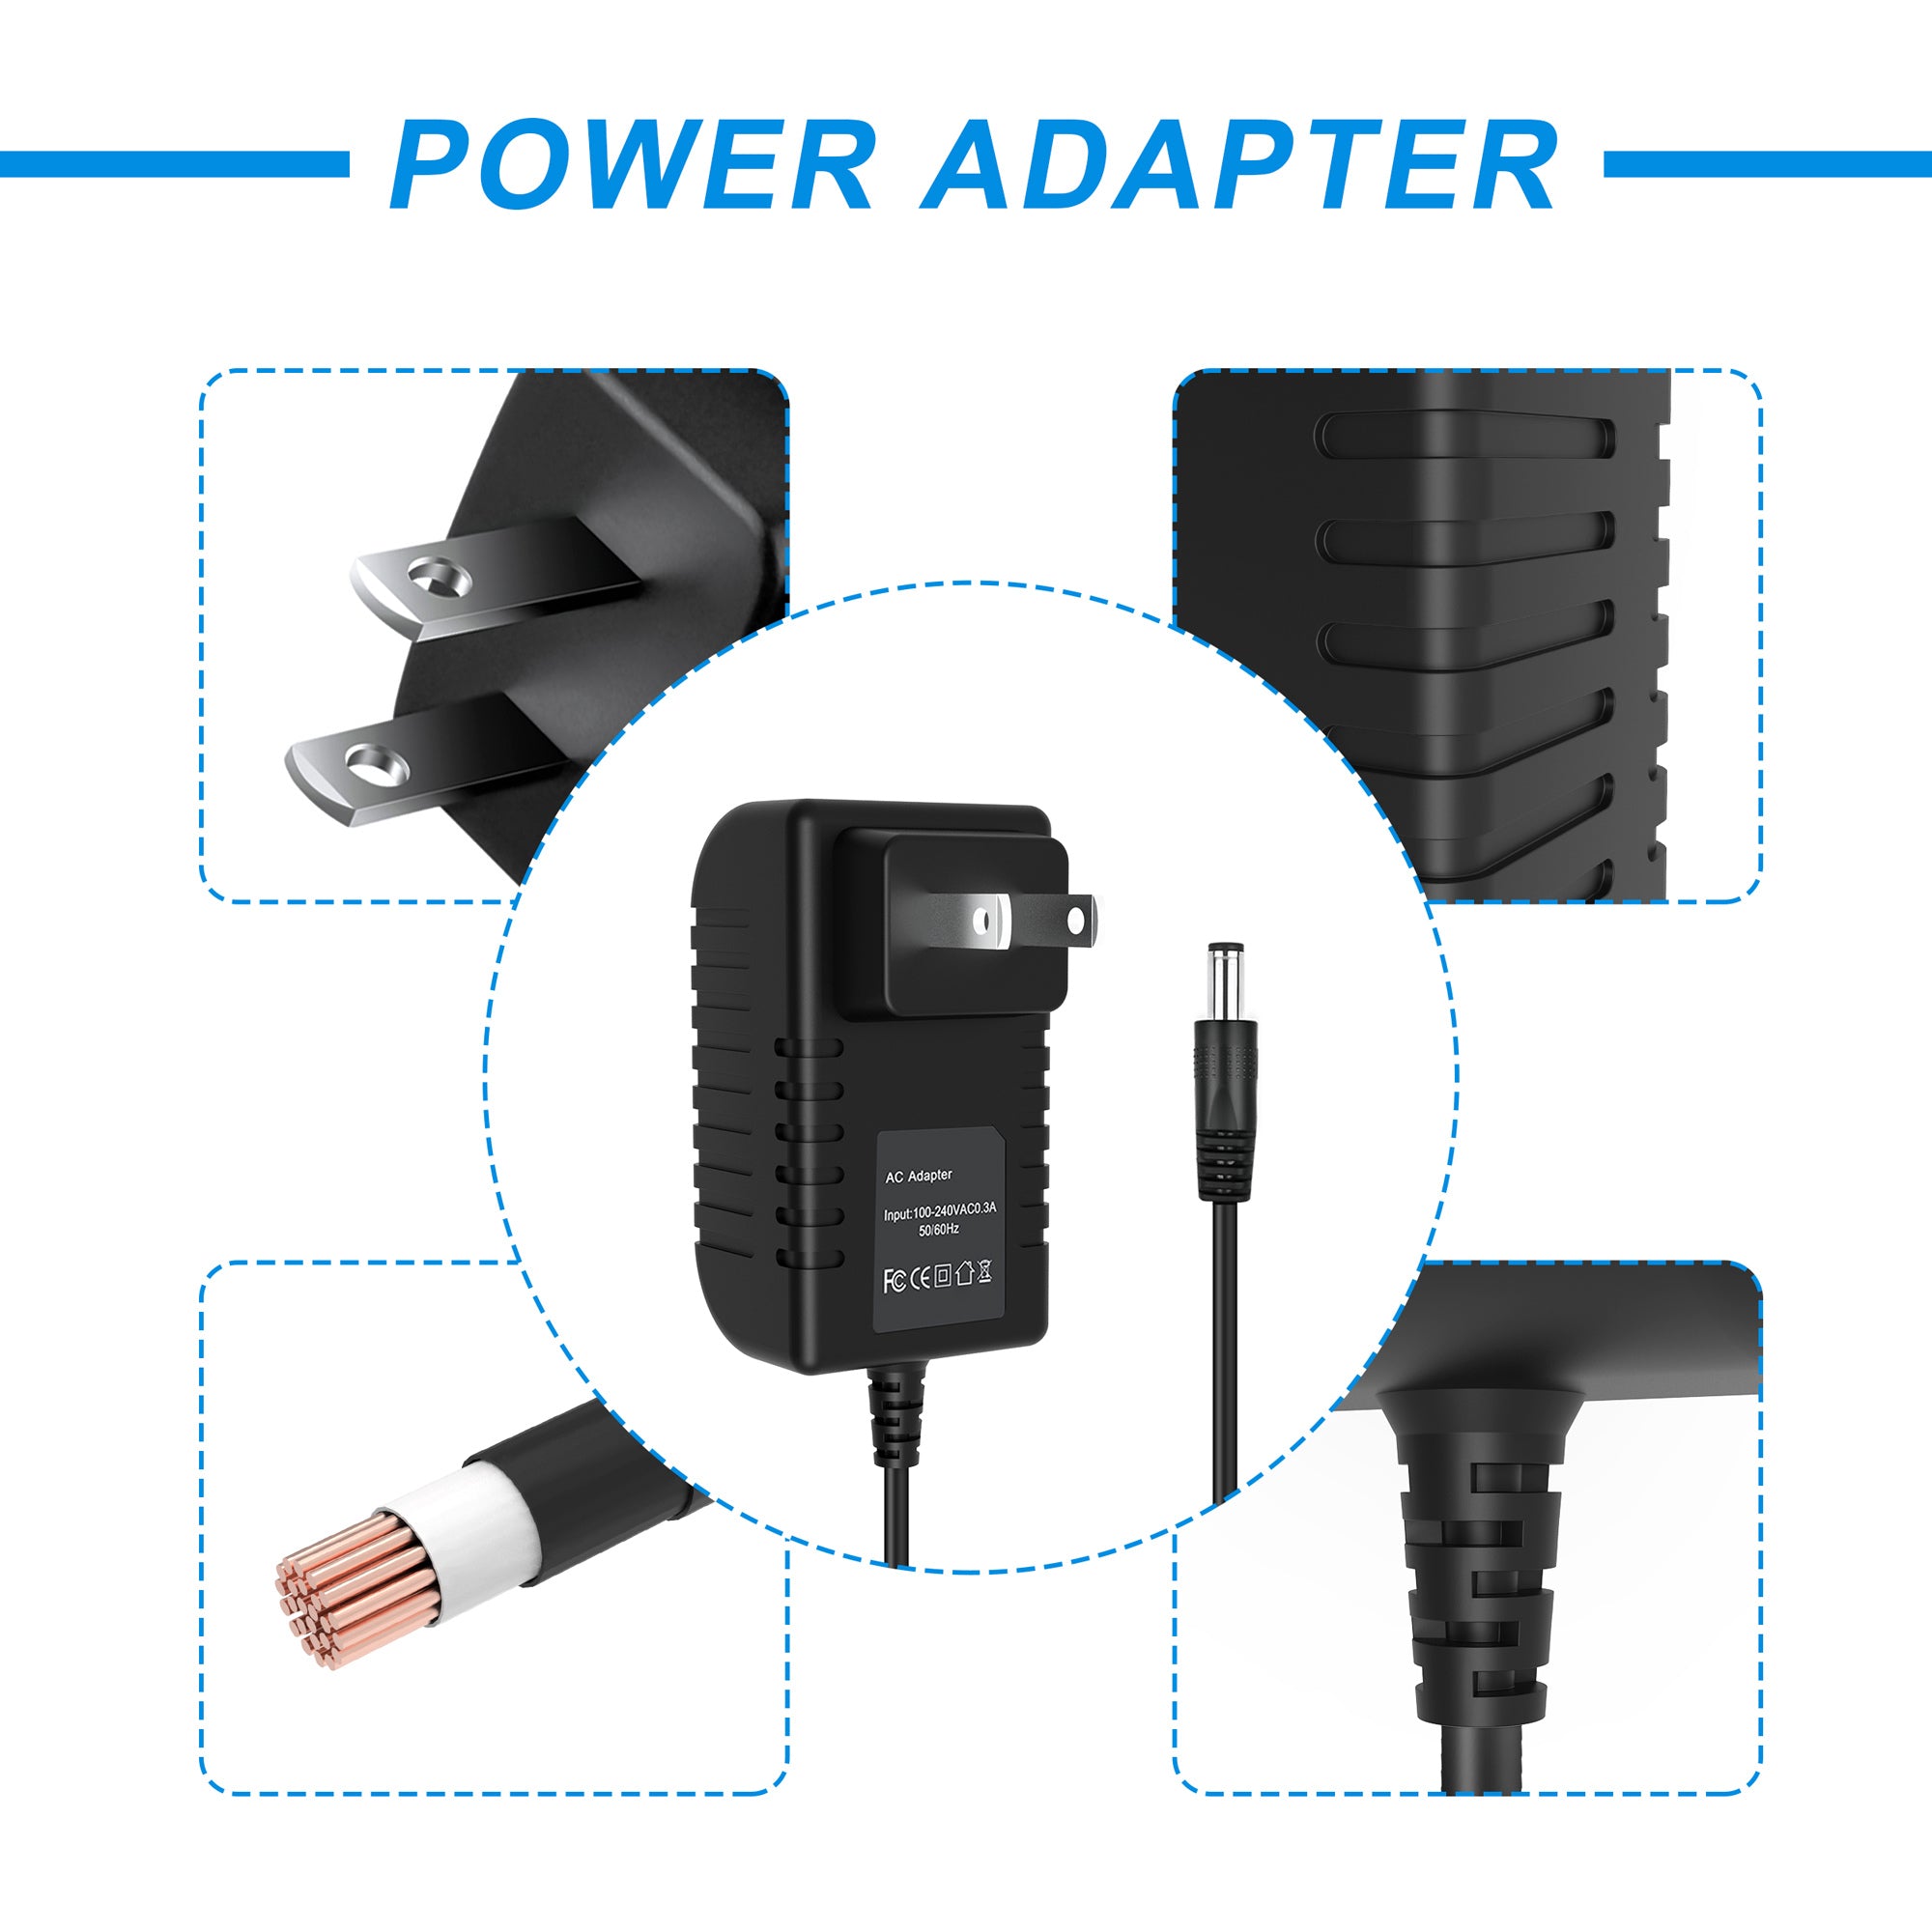 AbleGrid AC/DC Adapter Compatible with Model THX-009250KB Android super pad Tablet PC Power Supply Cord Cable PS Wall Home Charger Input: 100 - 240 VAC 50/60Hz Worldwide Voltage Use Mains PSU